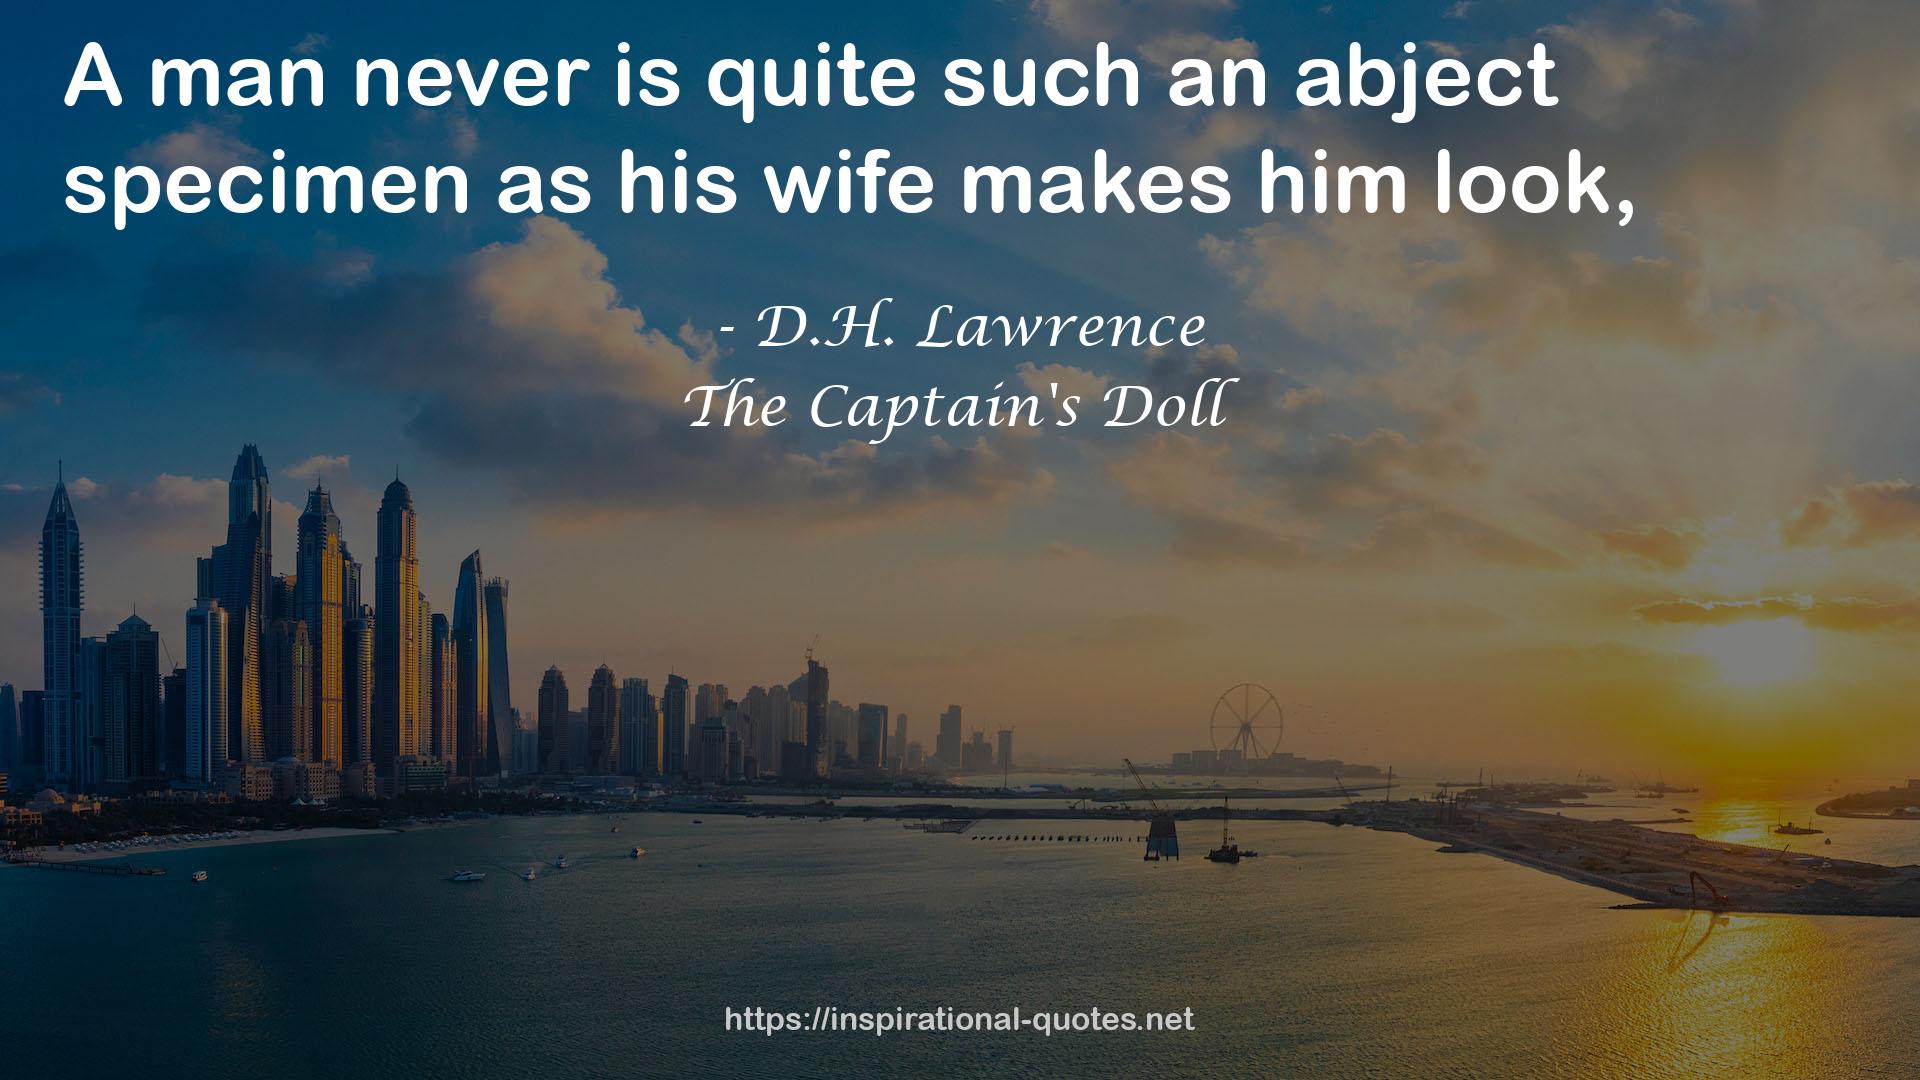 The Captain's Doll QUOTES